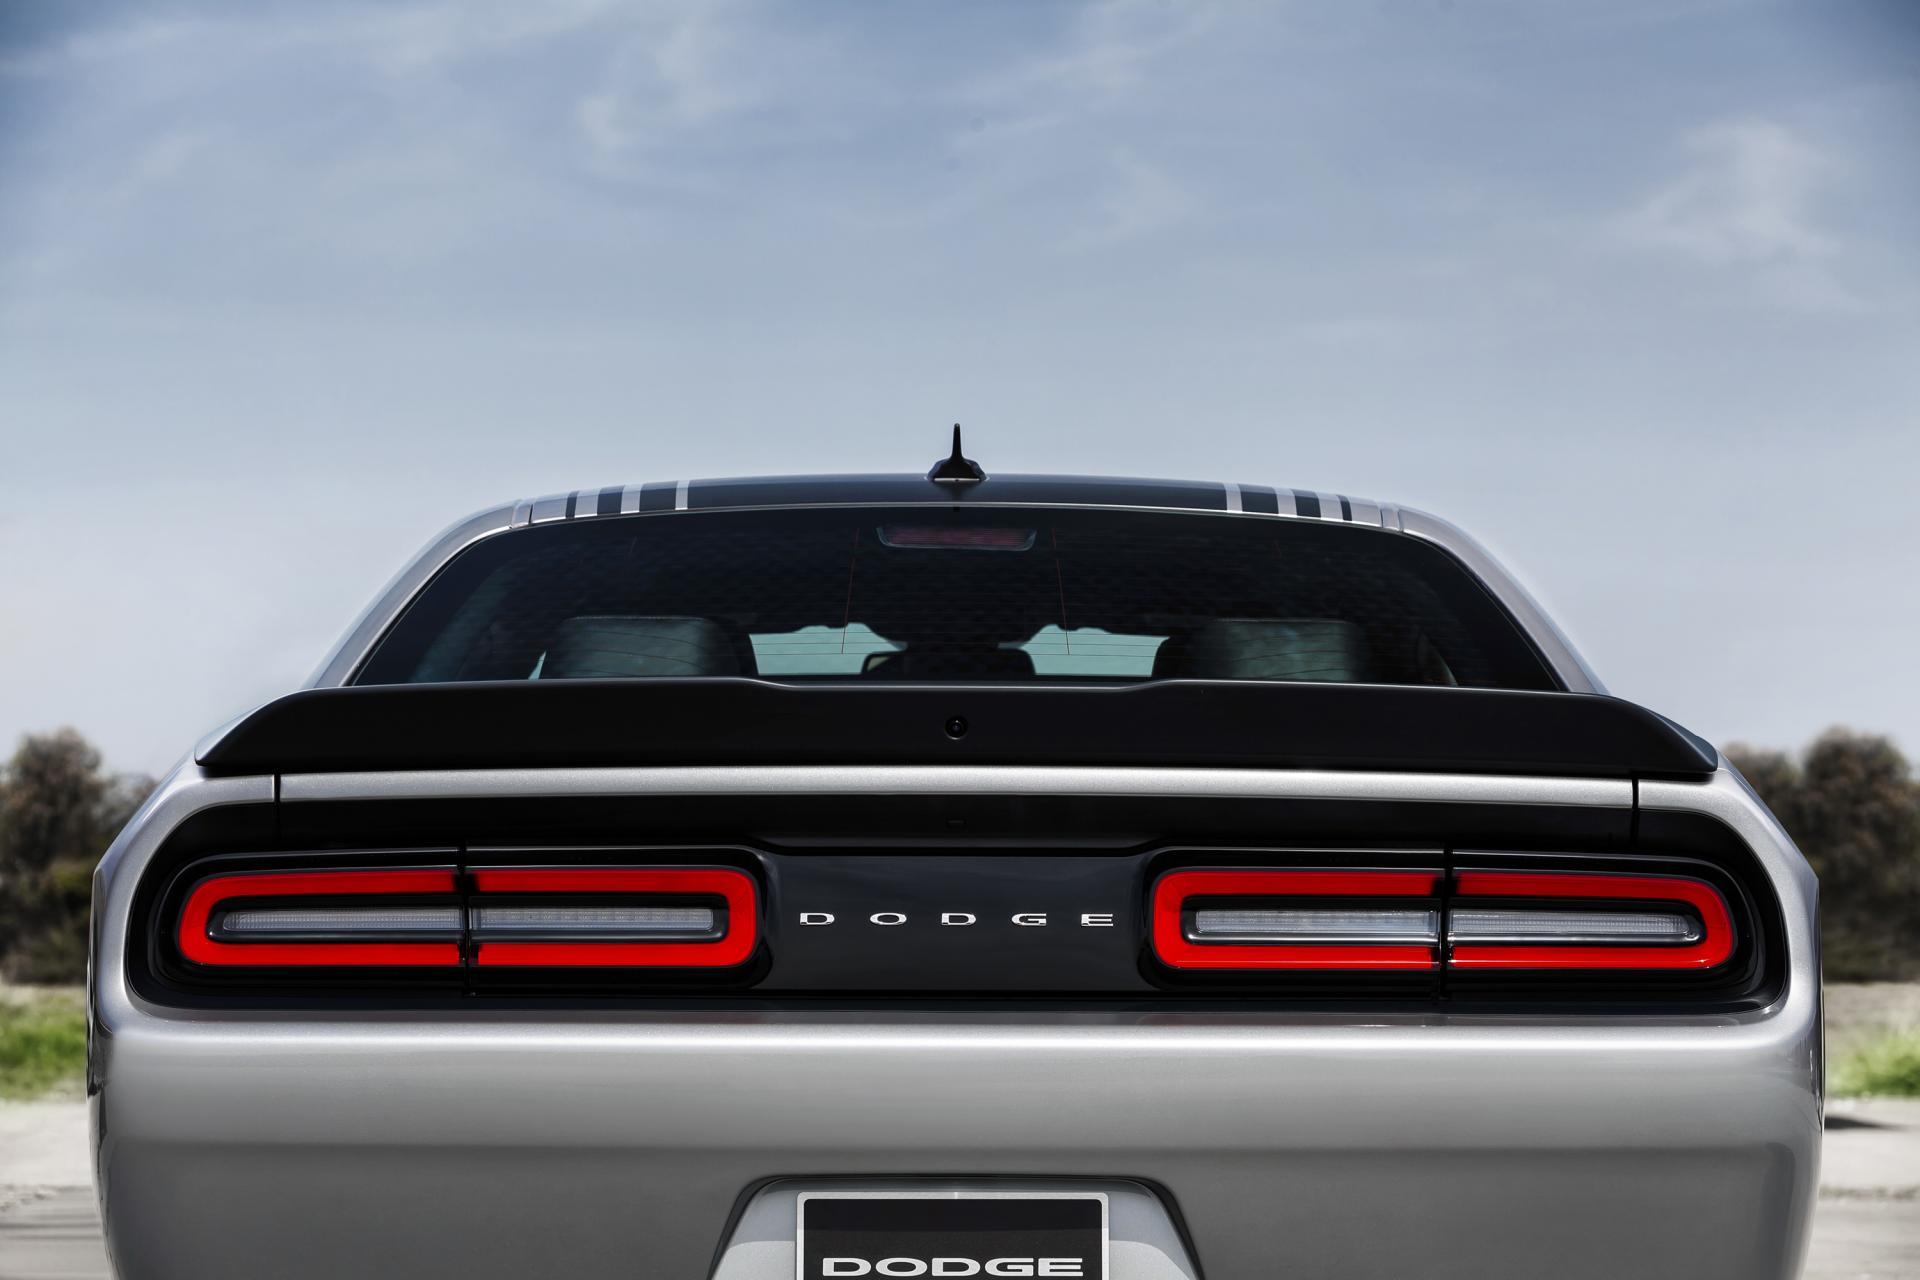 2015-Dodge-Challenger-Coupe-030 (1) Wallpaper